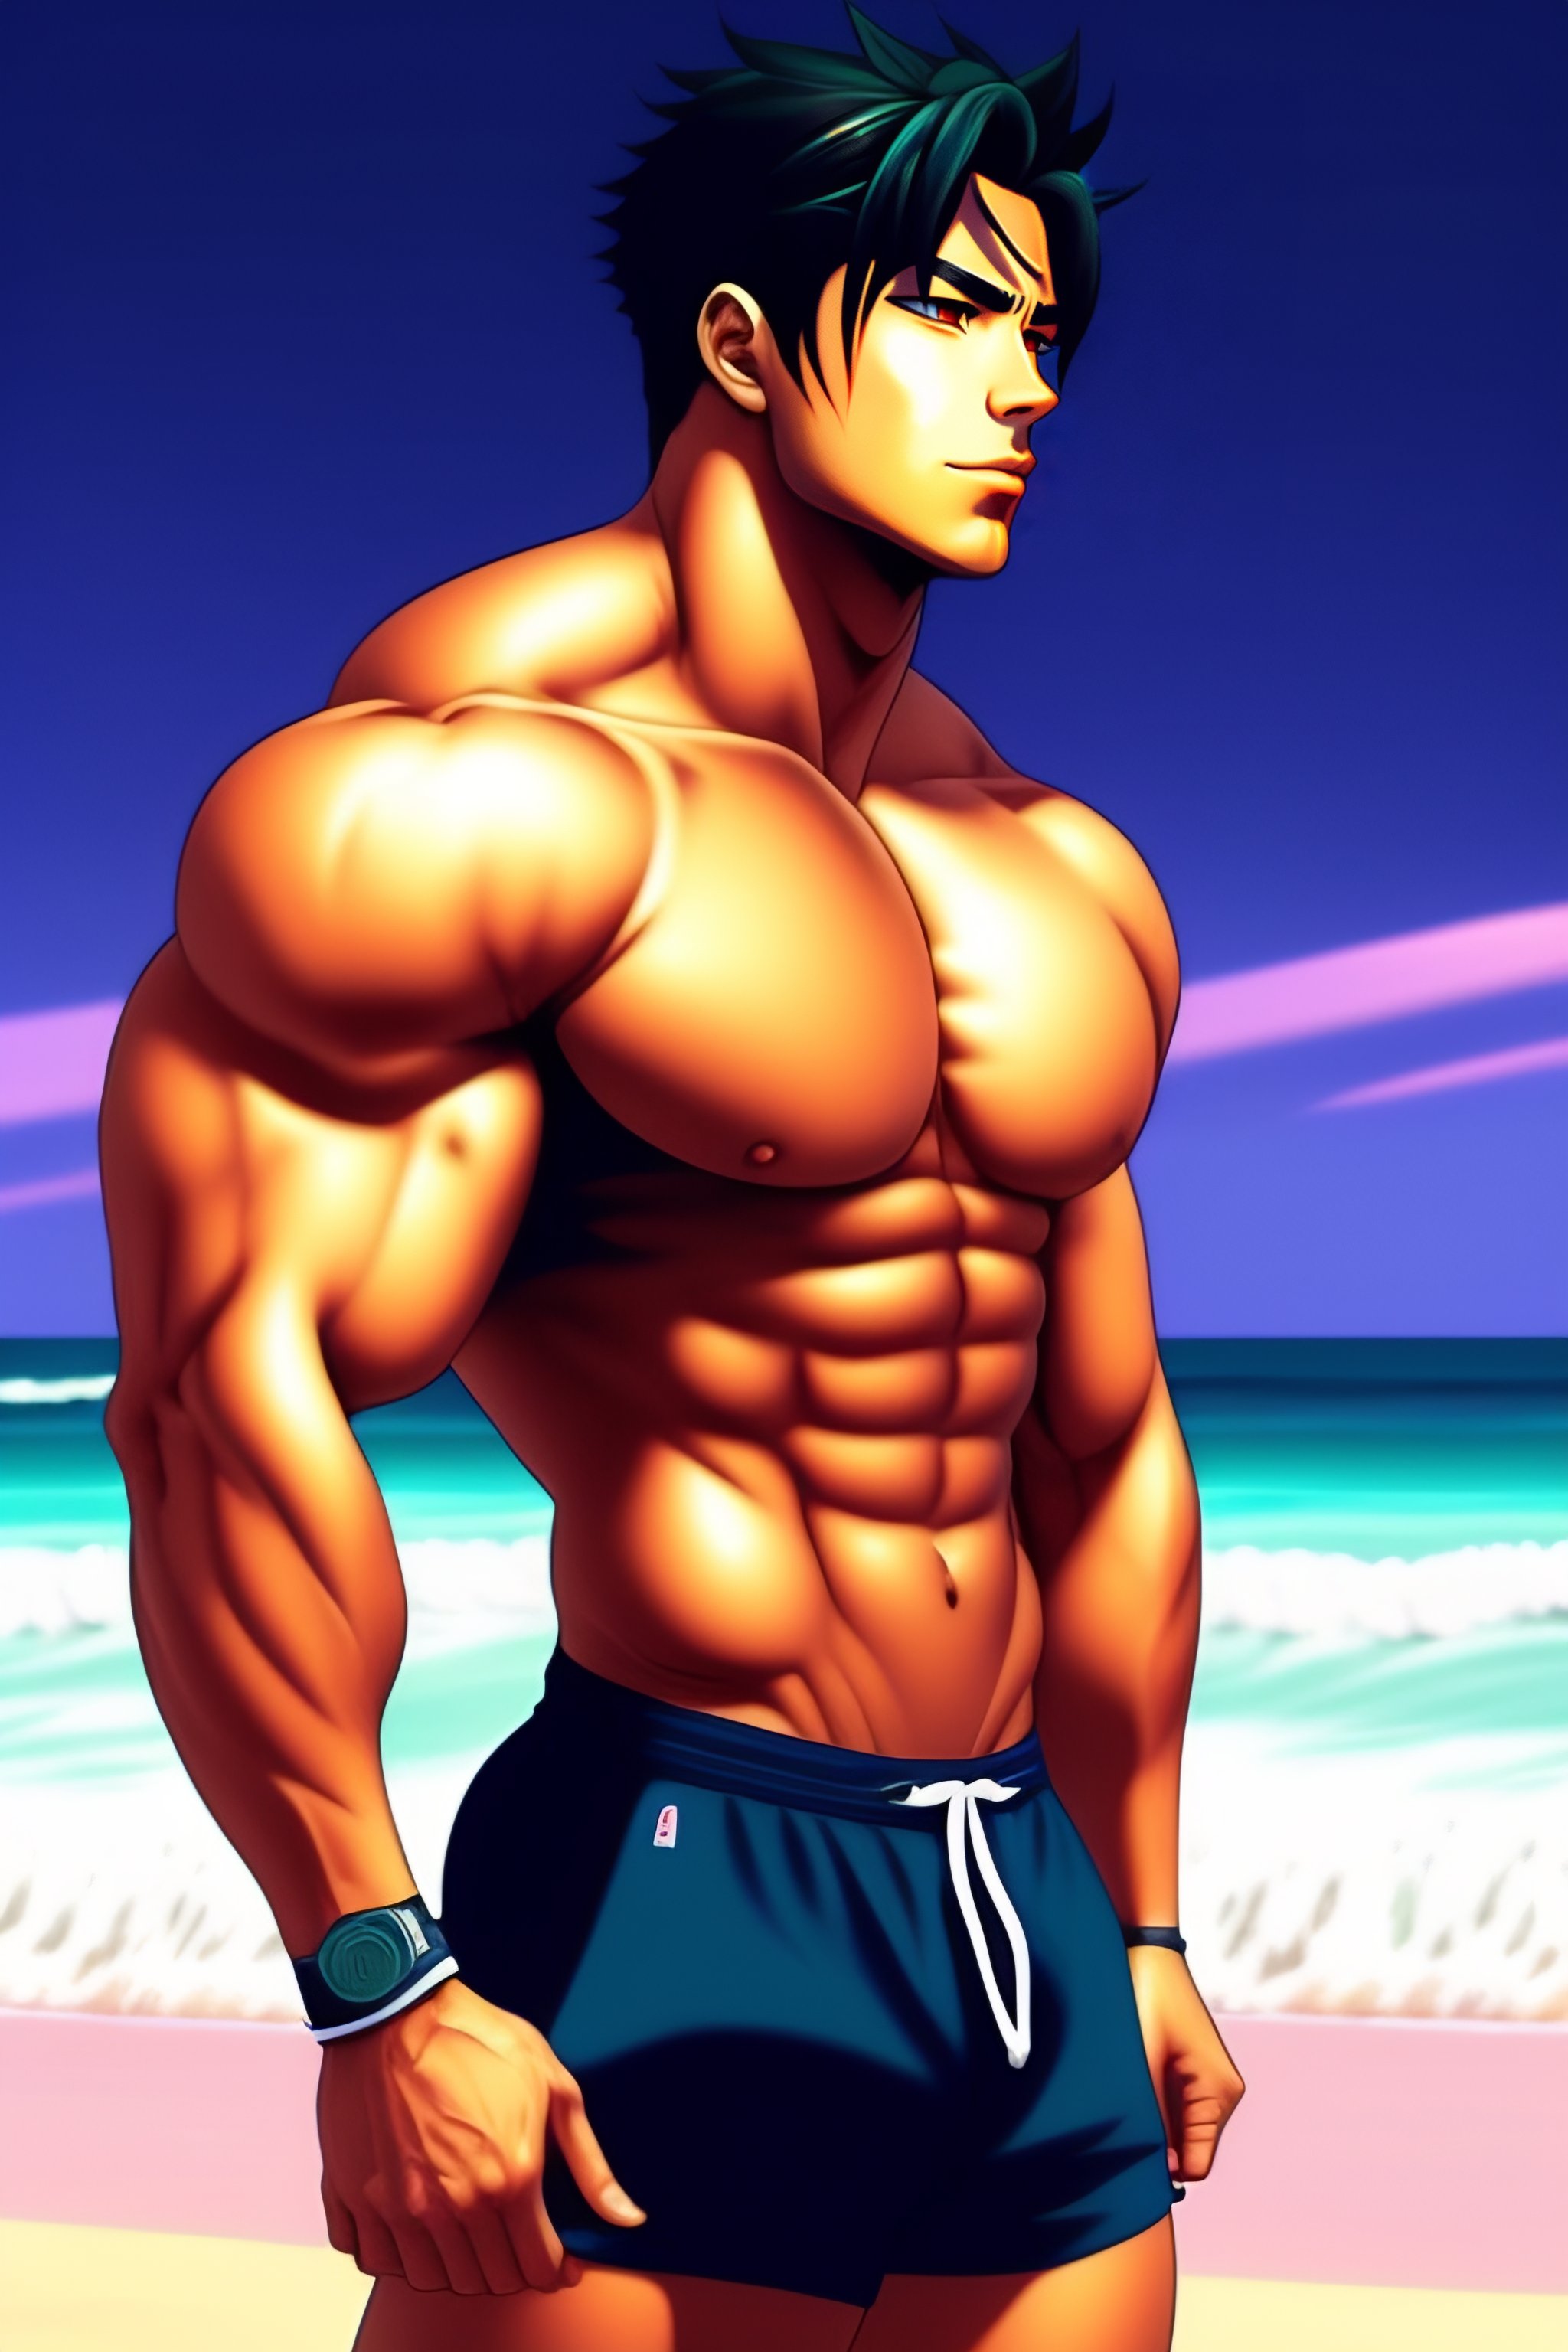 Male muscular anime character